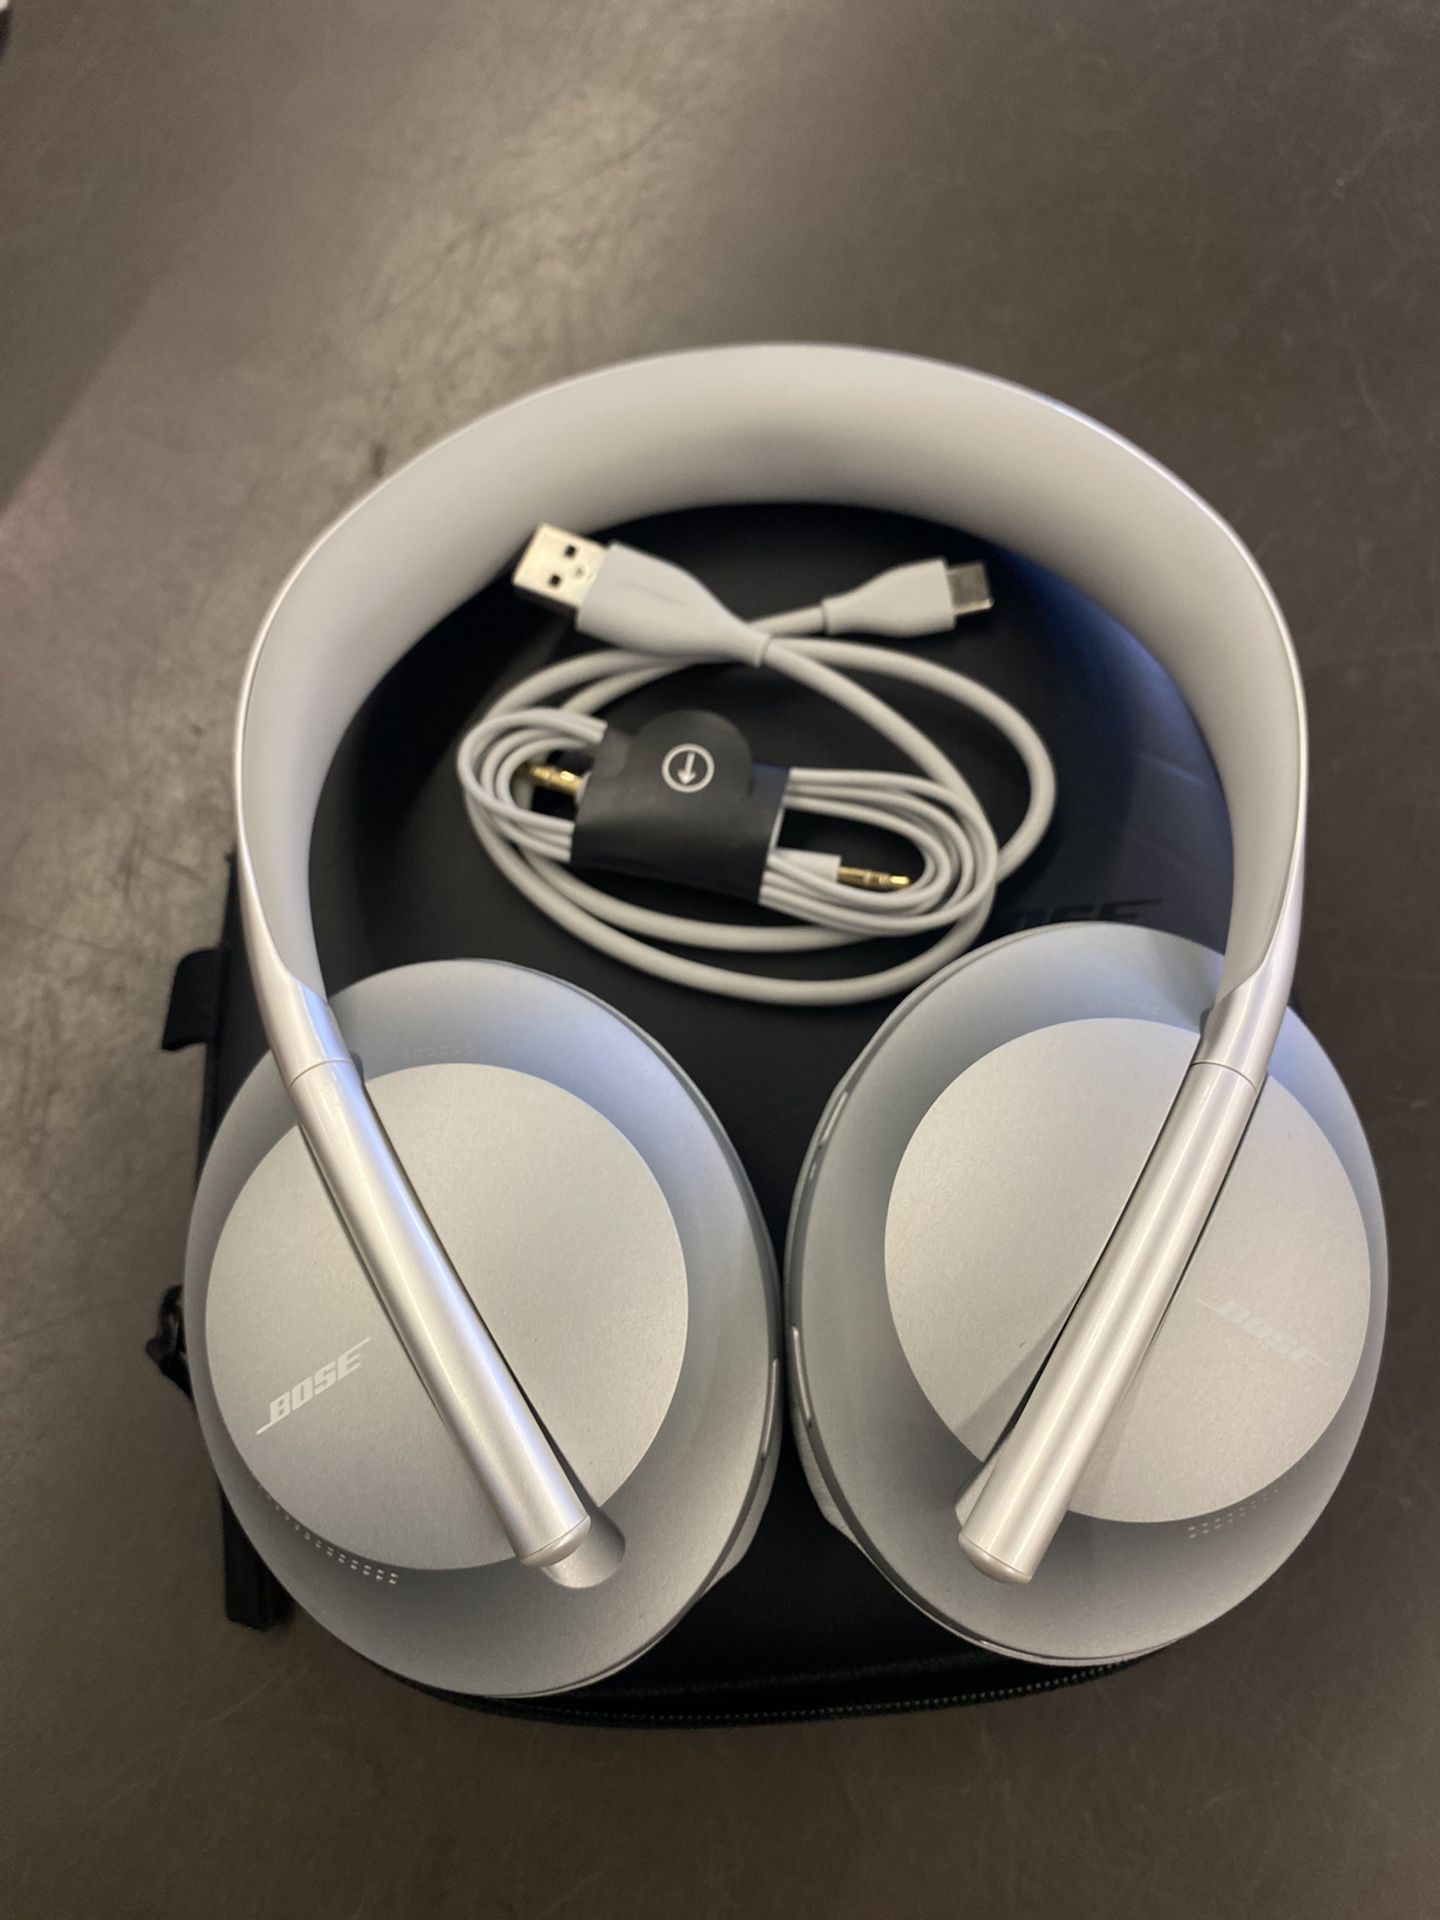 Bose Noise Canceling 700 Wireless Headphones With USB Charger In Case 